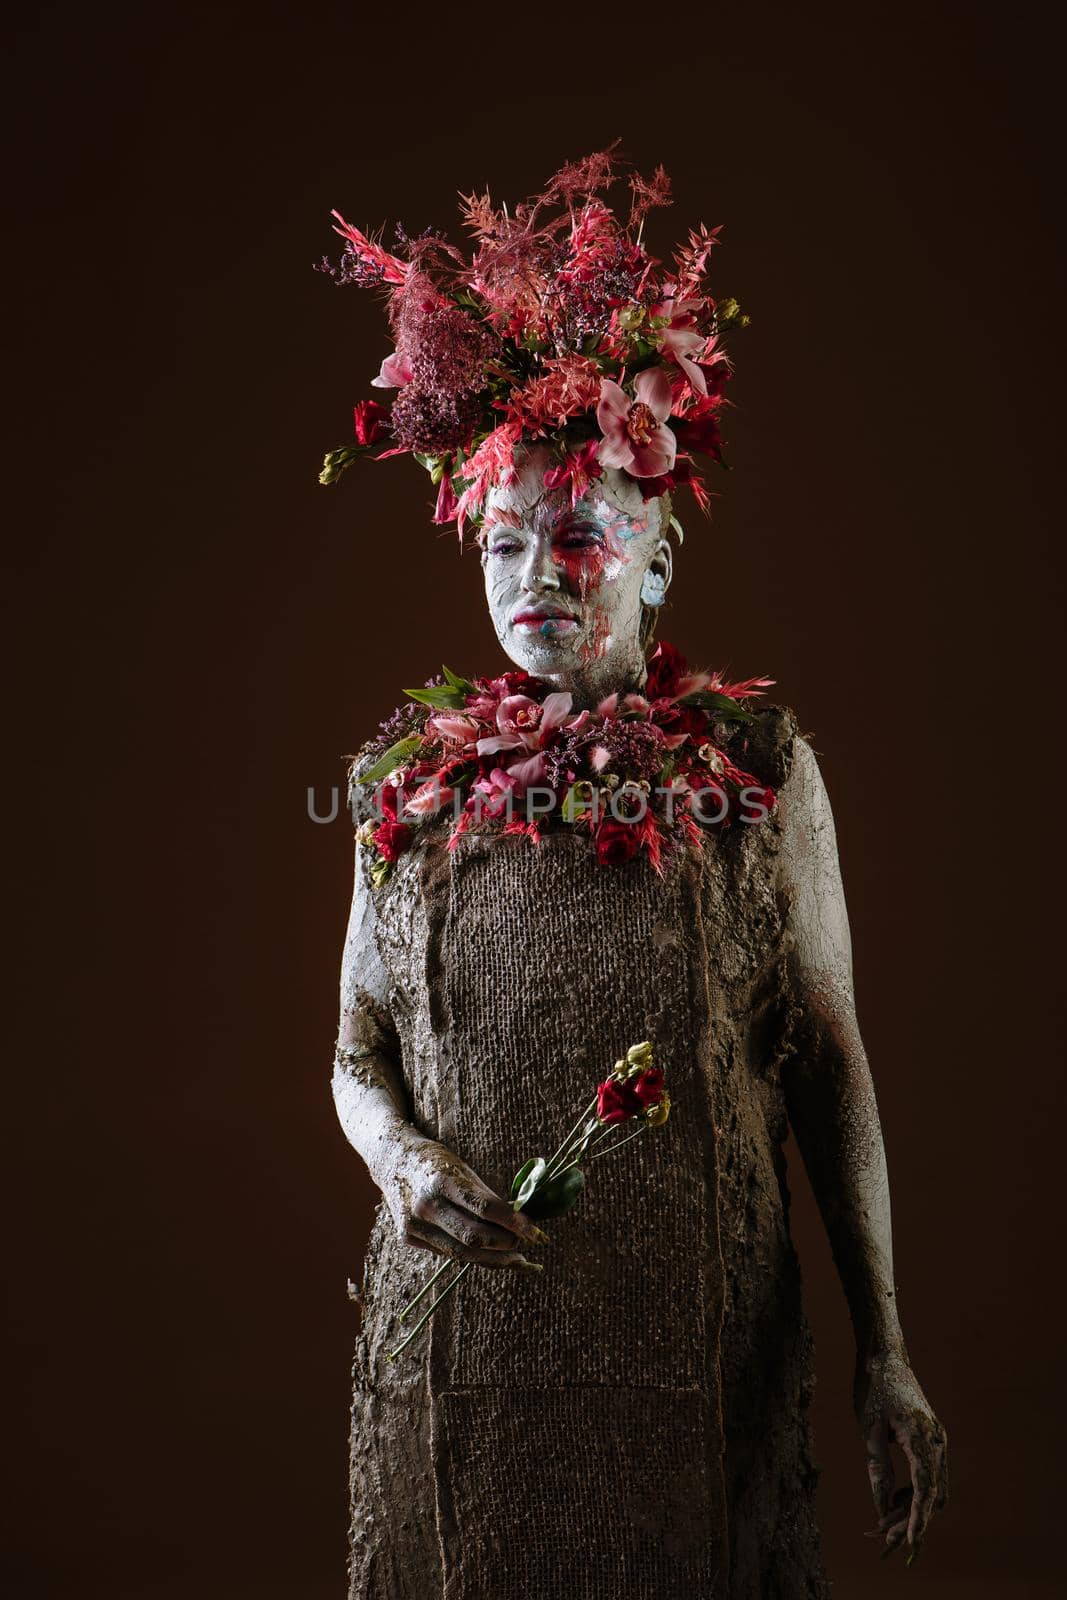 A girl smeared with clay. The model has a headdress made of flowers.